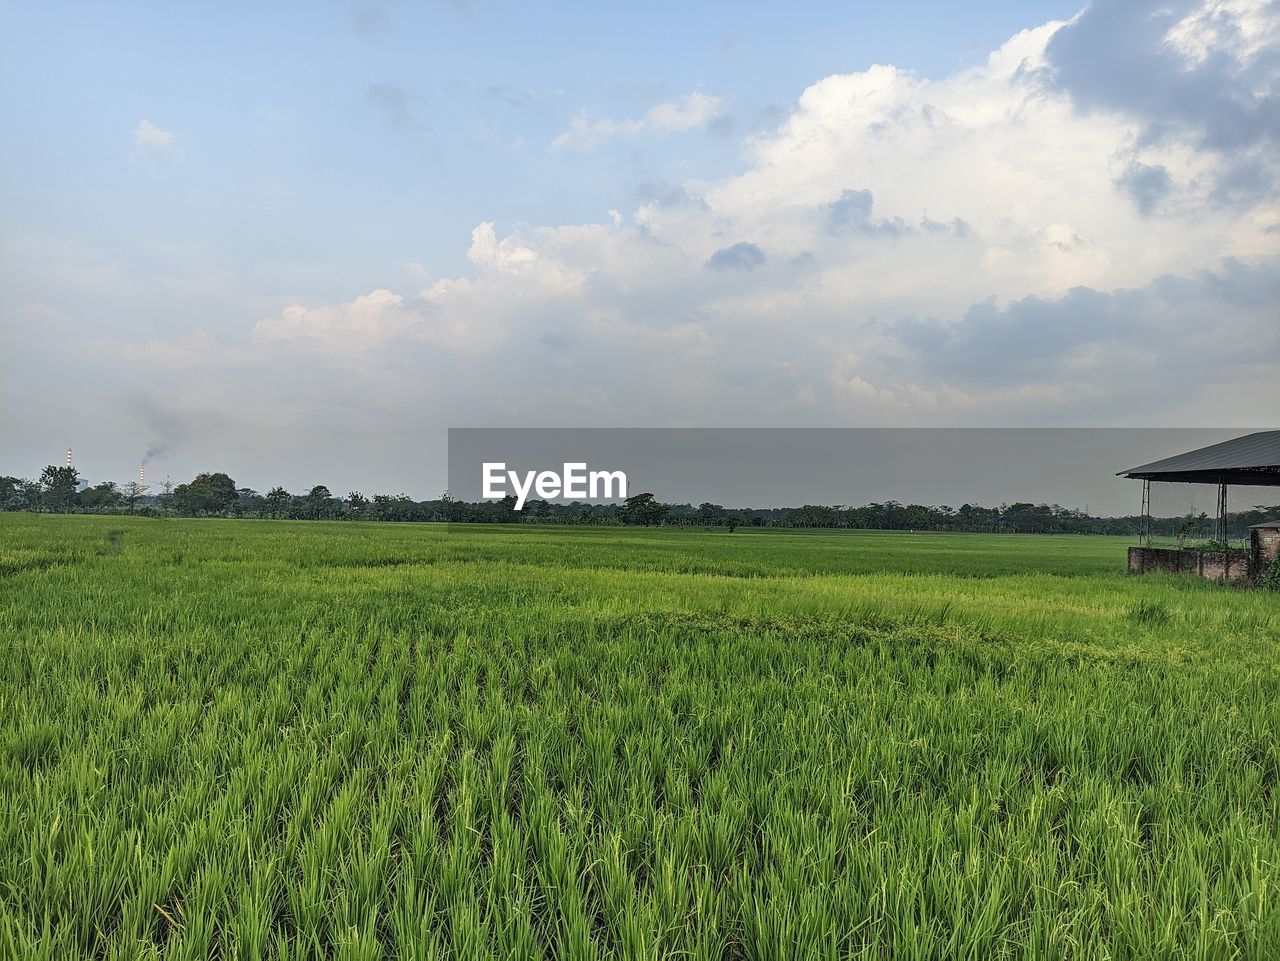 landscape, field, agriculture, rural scene, paddy field, sky, land, environment, plant, crop, plain, farm, grassland, cloud, nature, rural area, pasture, grass, growth, prairie, green, cereal plant, meadow, scenics - nature, beauty in nature, food, food and drink, horizon, no people, rice, tranquility, outdoors, rice - food staple, rice paddy, social issues, architecture, day, environmental conservation, natural environment, corn, tranquil scene, building, built structure, soil, occupation, vegetable